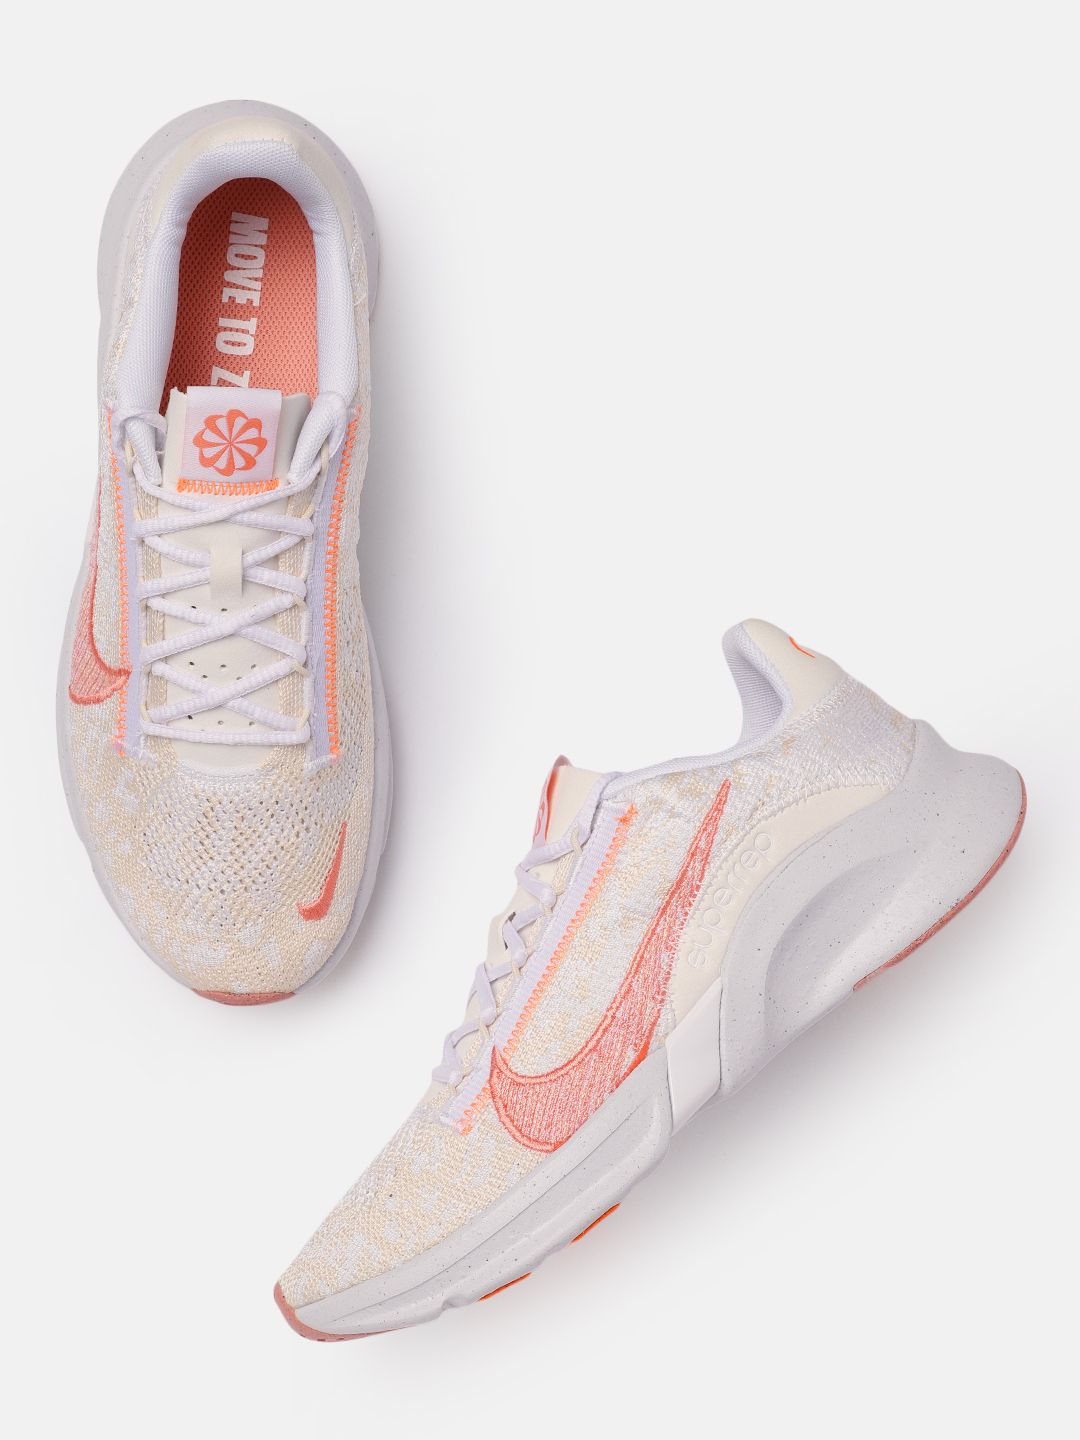 Nike Women Off White Woven Design SuperRep Go 3 Flyknit Next Nature Regular Training Shoes Price in India